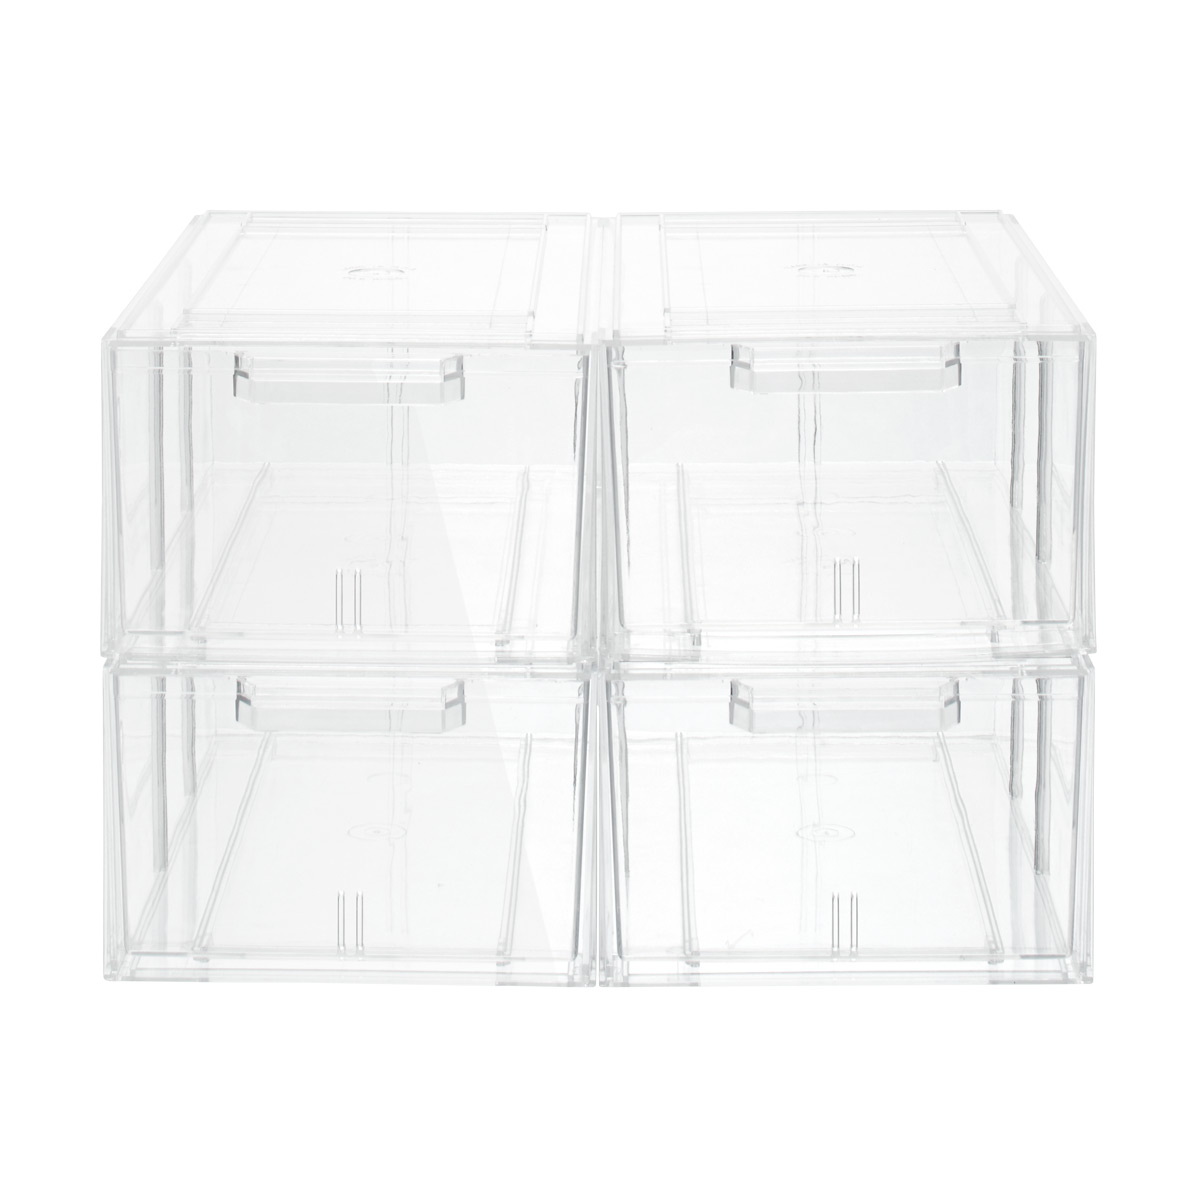 https://images.containerstore.com/catalogimages?sku=10066357